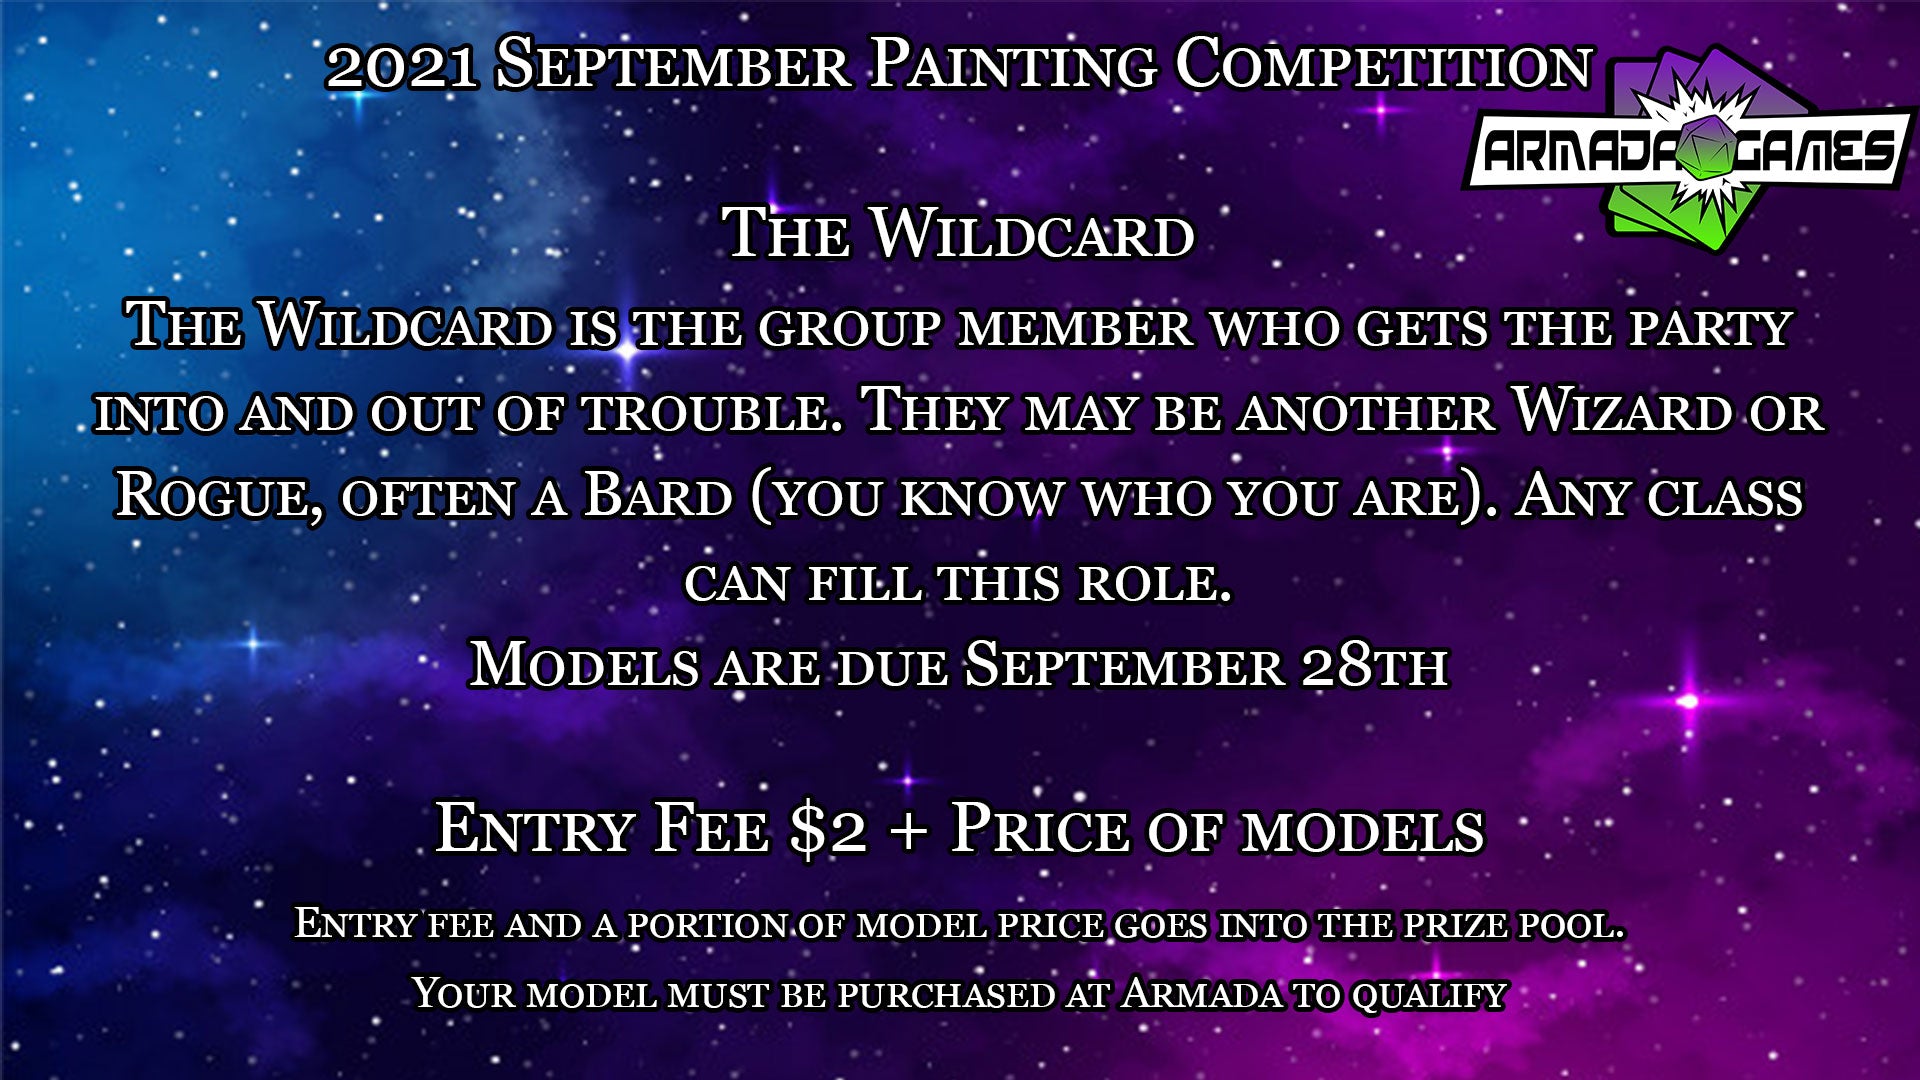 2021 September Painting Competition